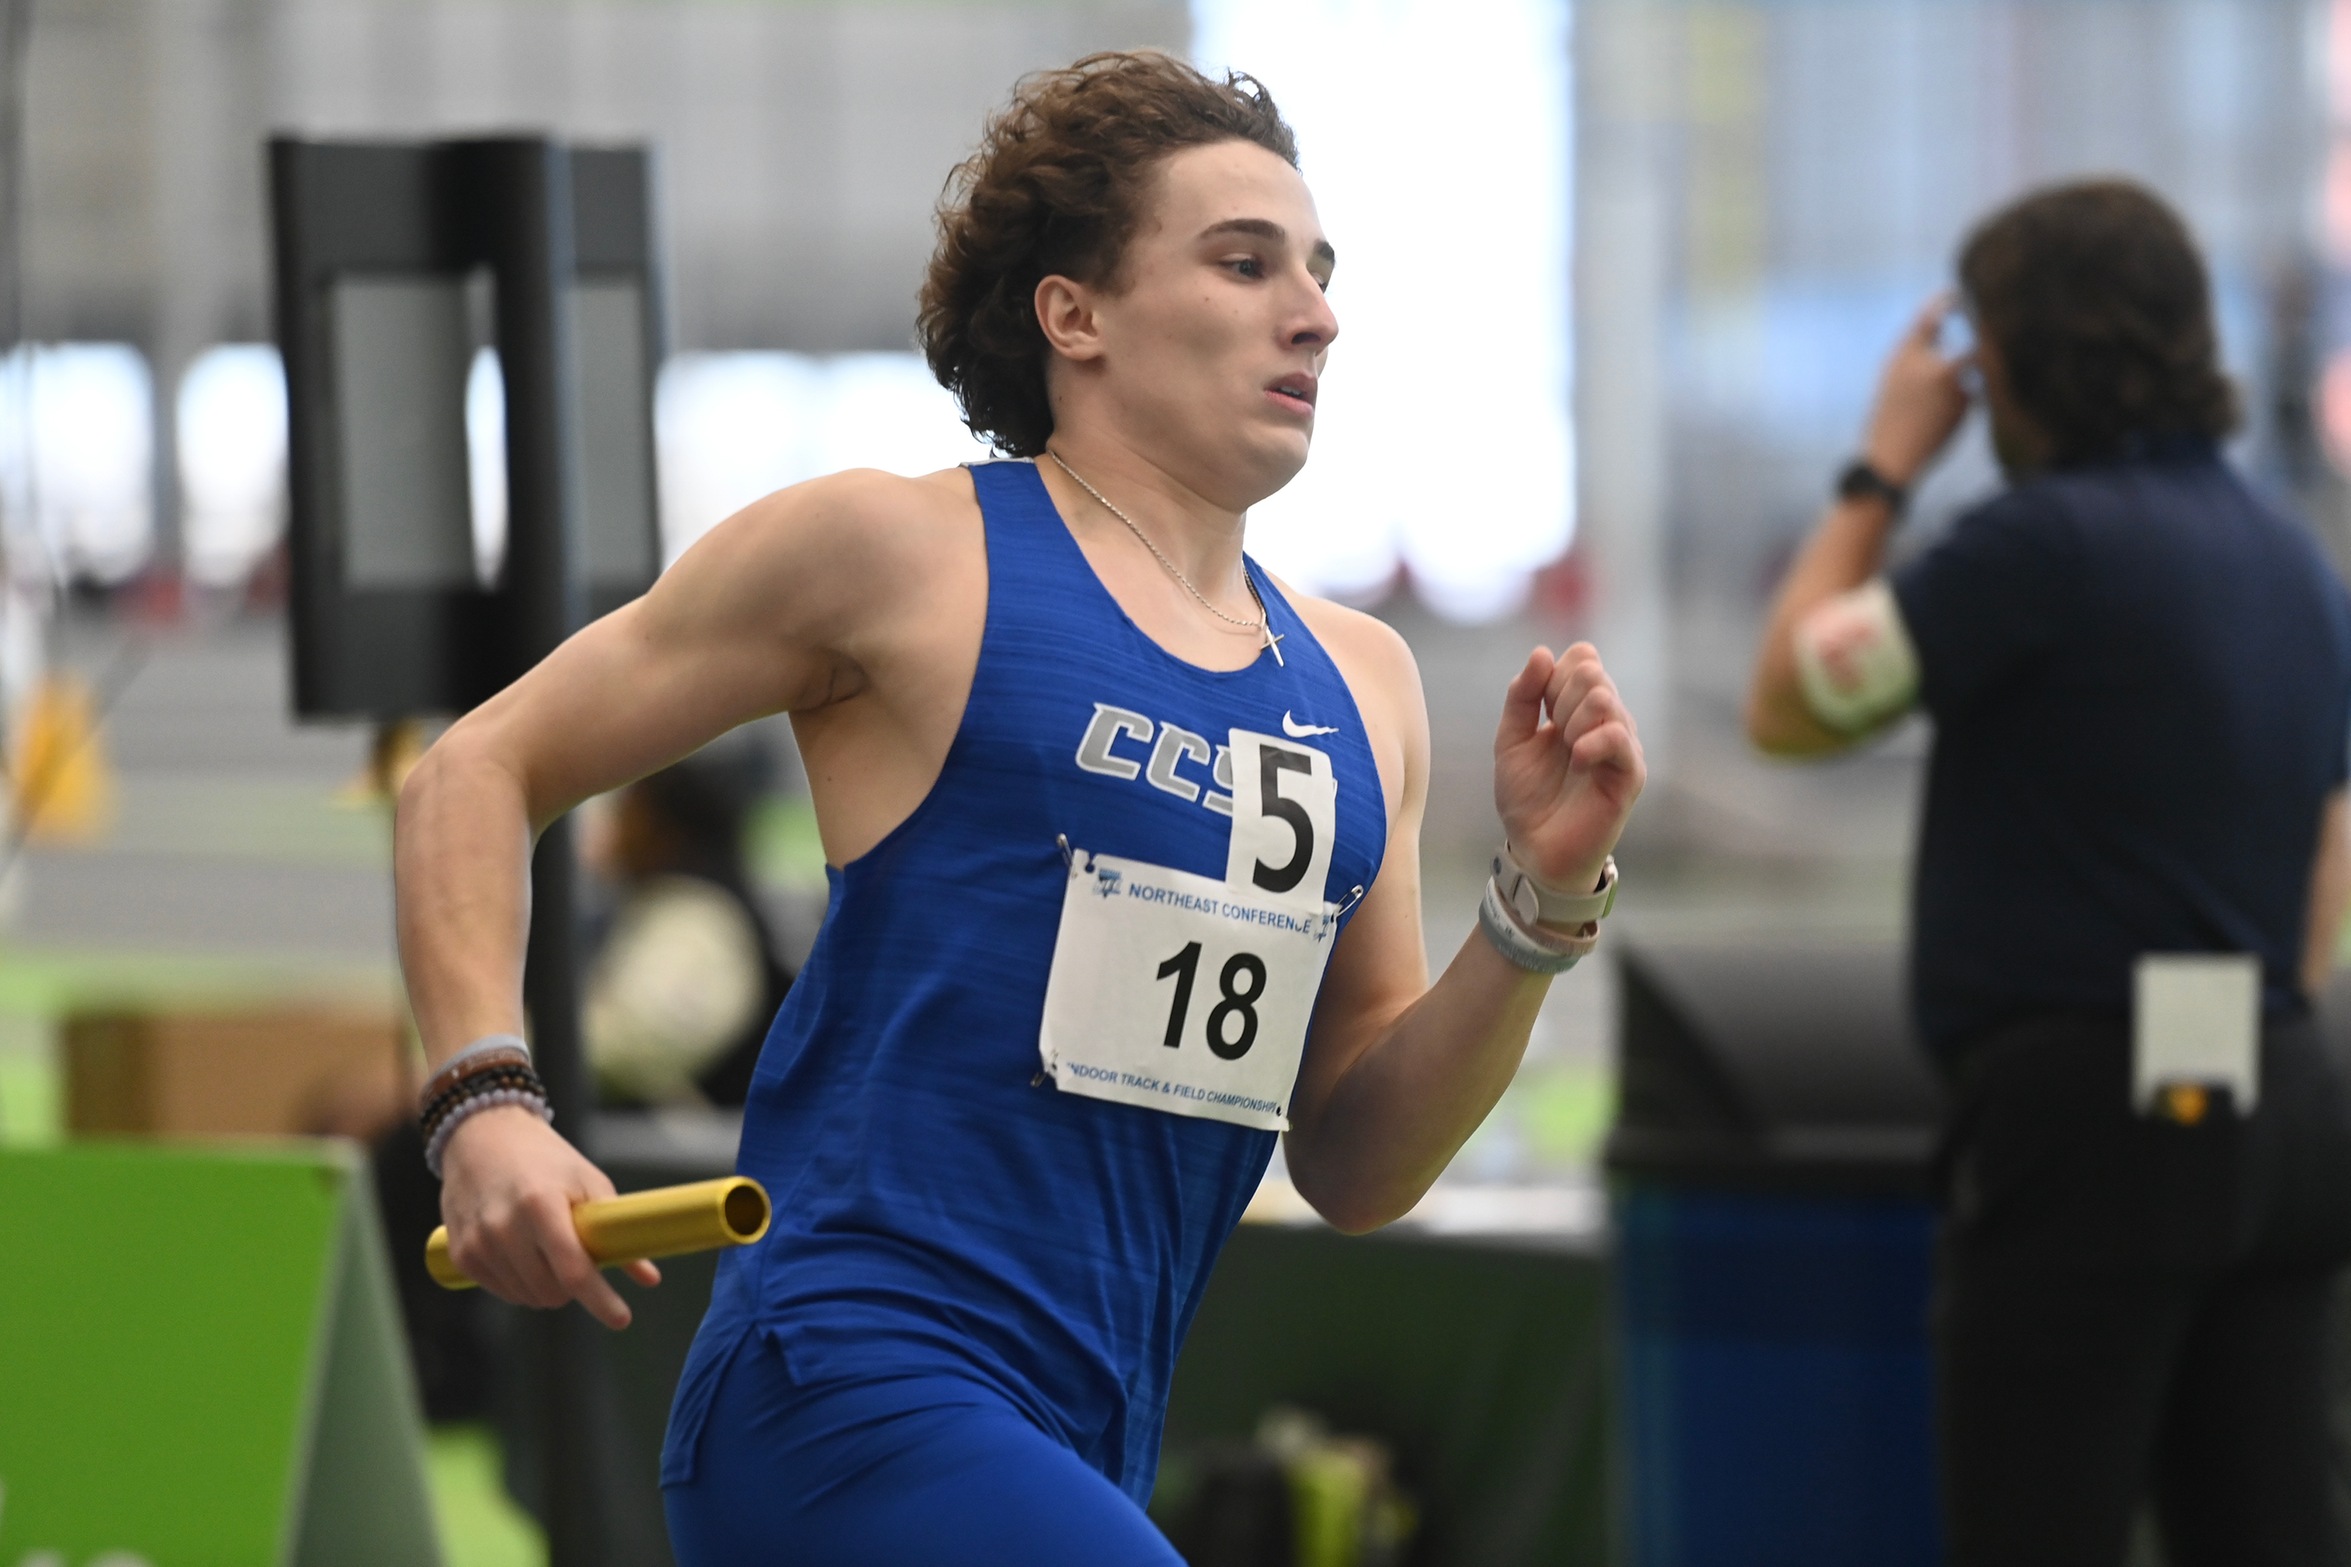 Men's Track Breaks School Record on Day Two of IC4A/ECAC Championships